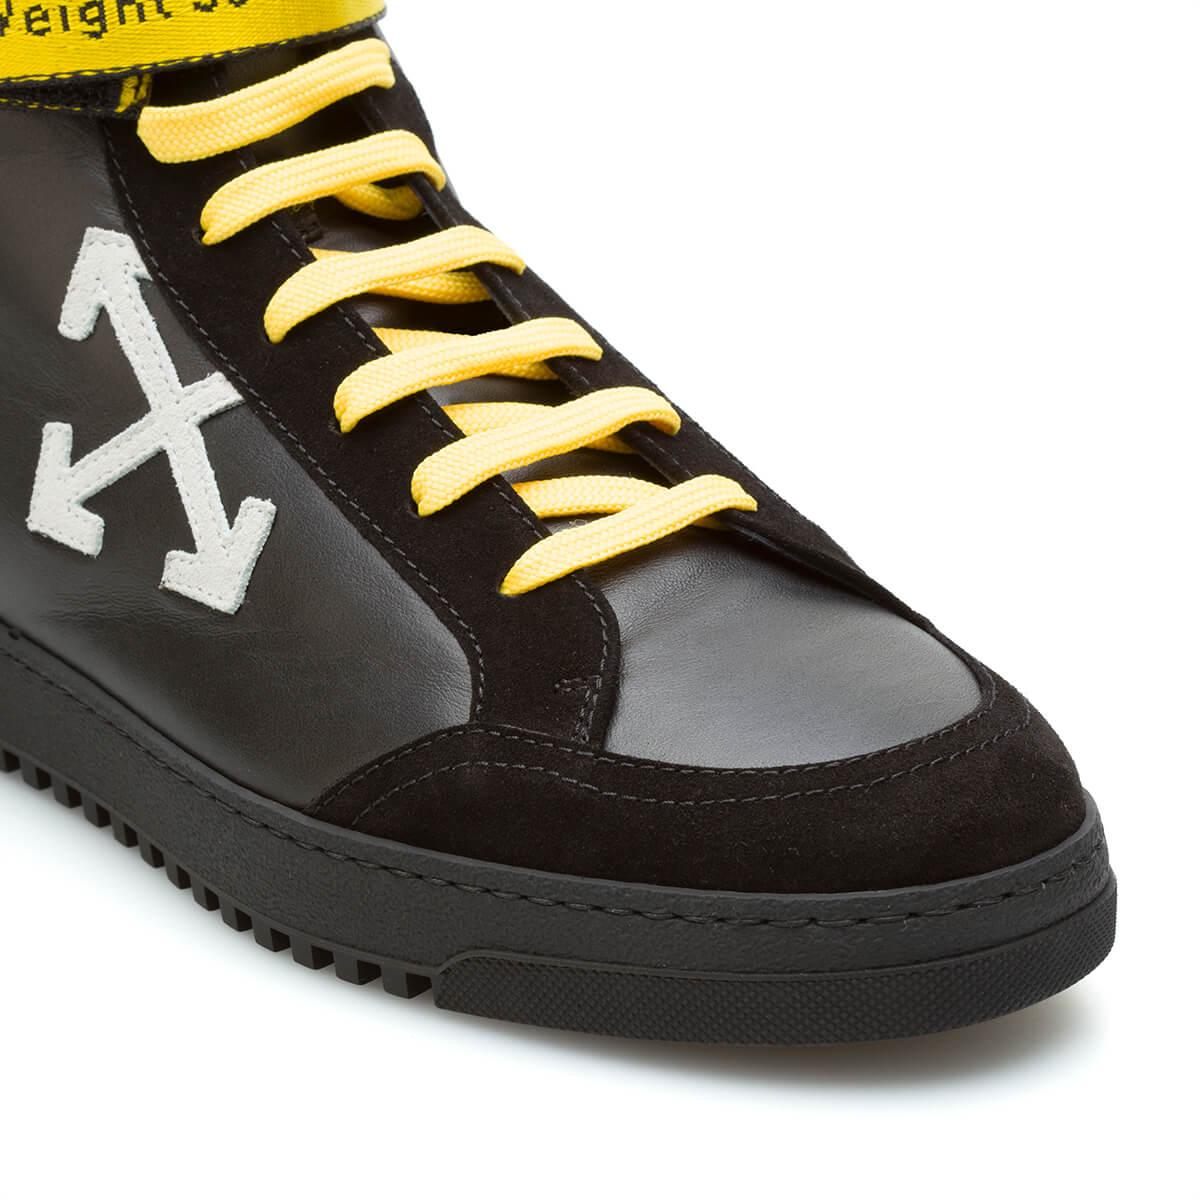 Off-White c/o Virgil Abloh Leather High-top Sneakers in Black for Men - Lyst